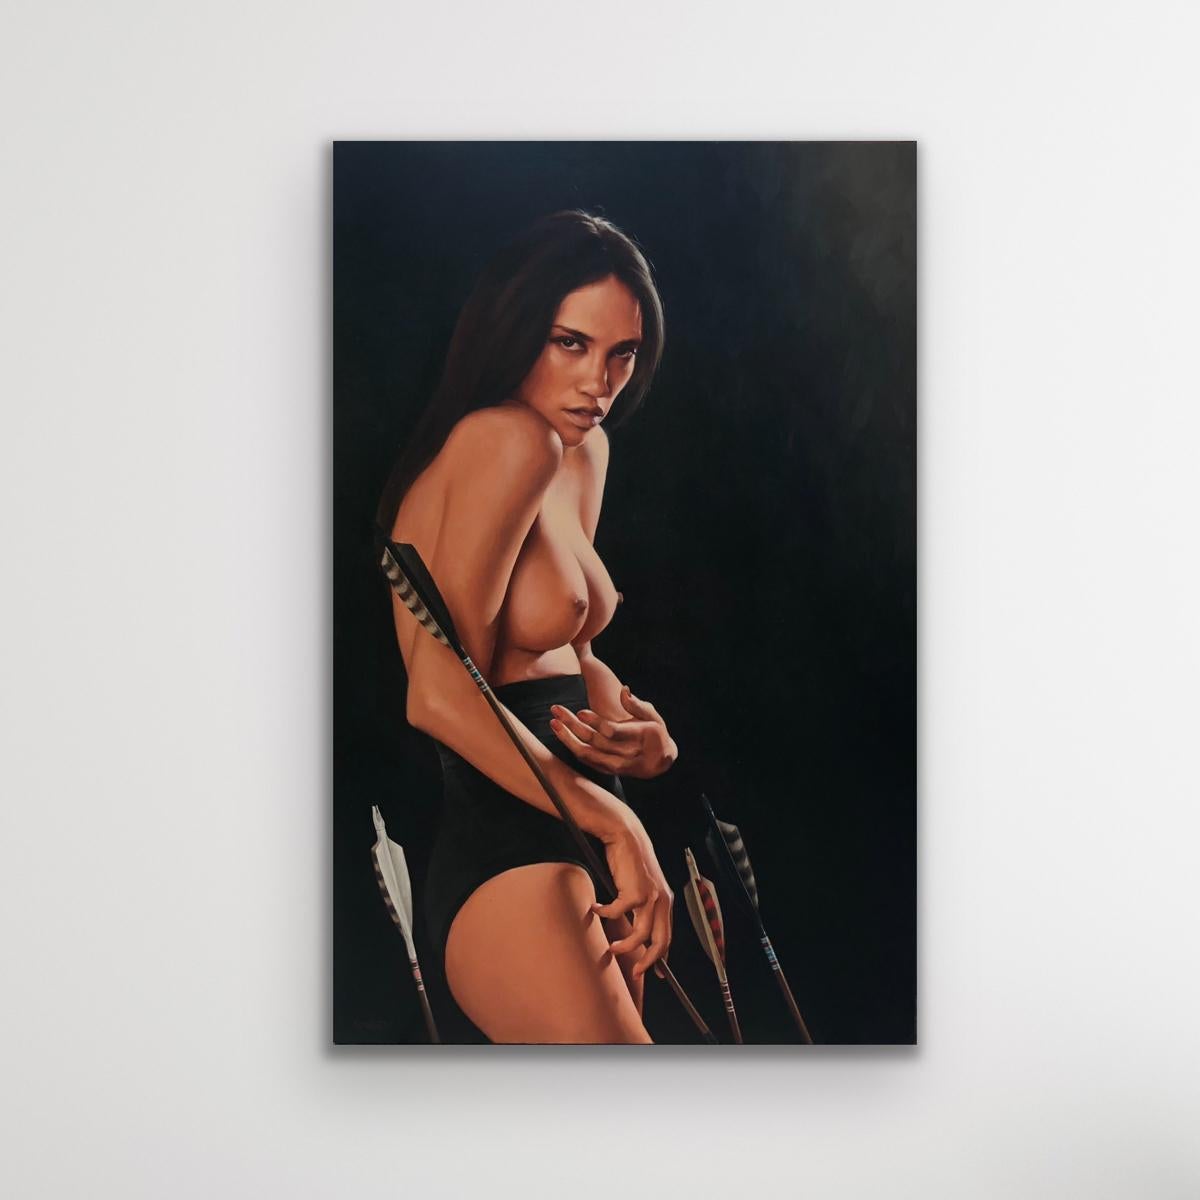 Semi nude figurative portrait painting of a woman with arrows - Painting by Aaron Nagel